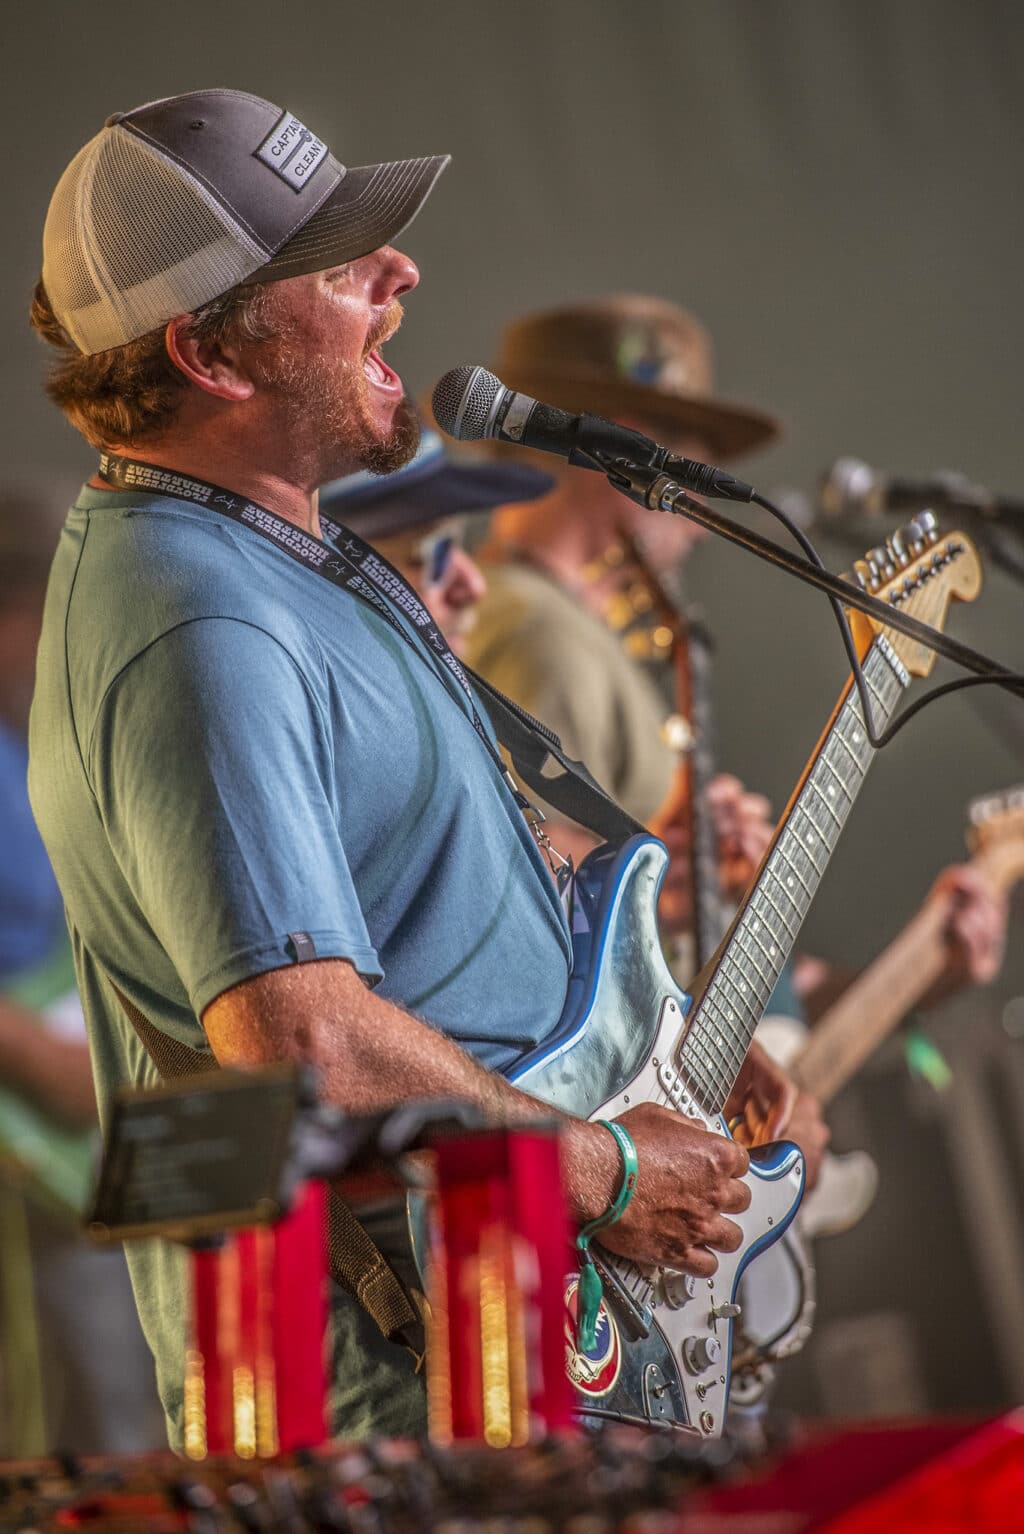 Bearded man playing an electric guitar sings into a microphone while wearing a truckers baseball cap.